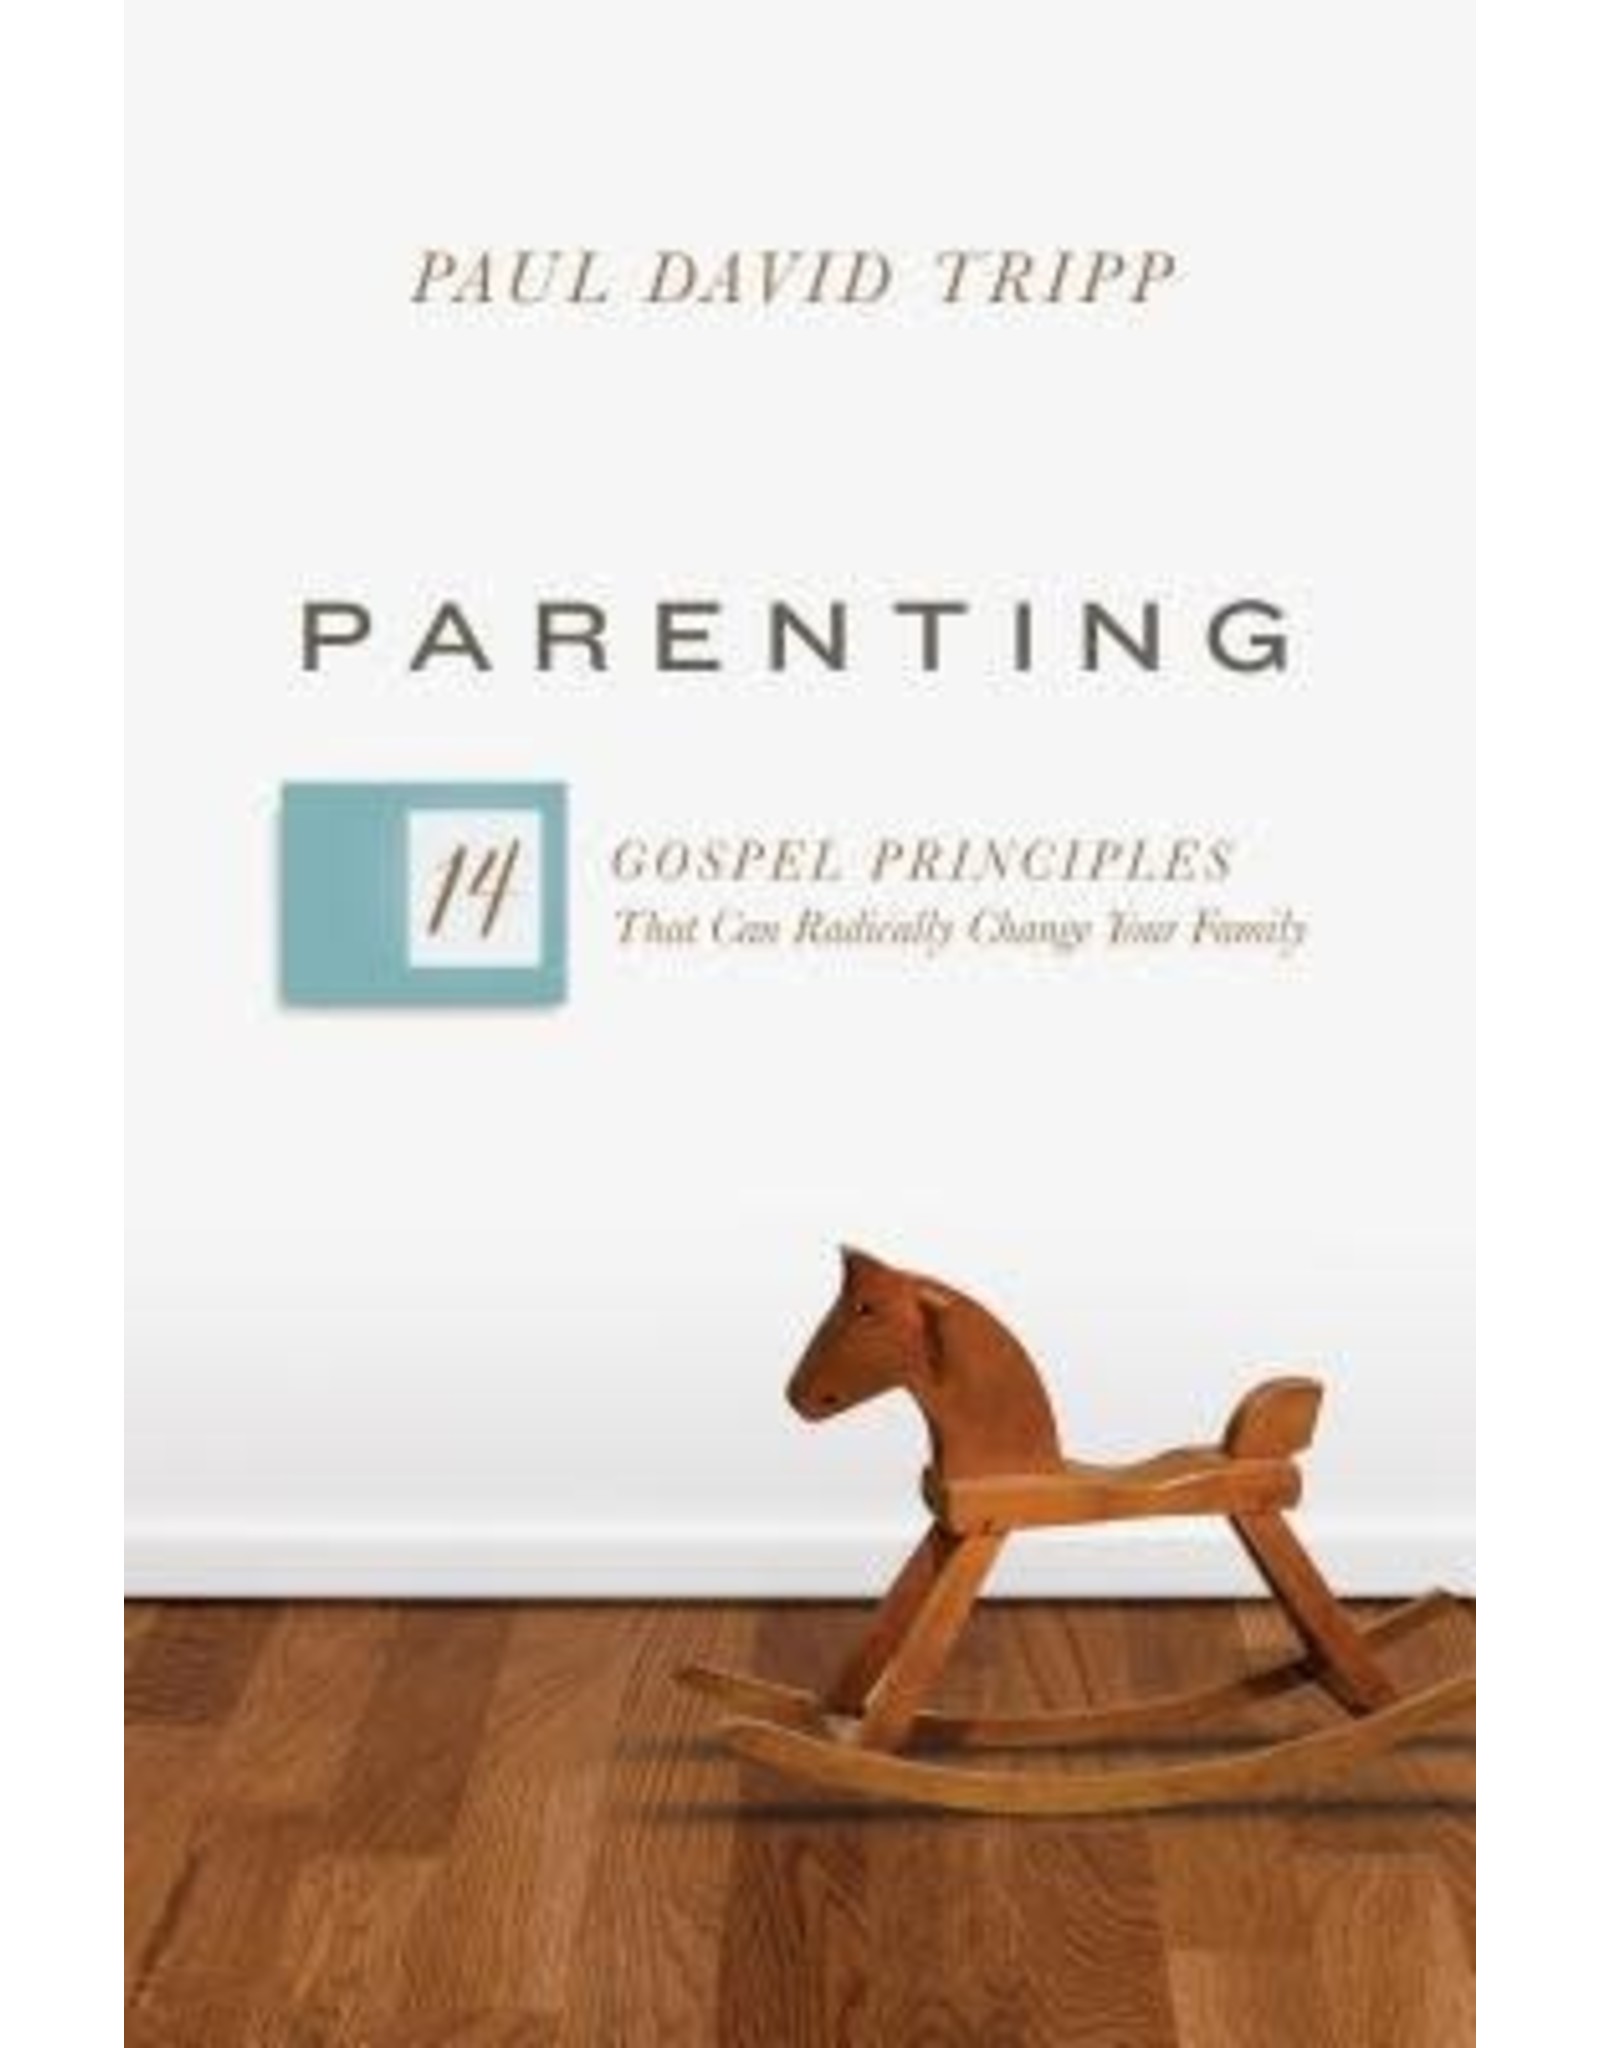 Paul David Tripp Parenting: 14 Gospel Principles That Can Radically Change Your Family